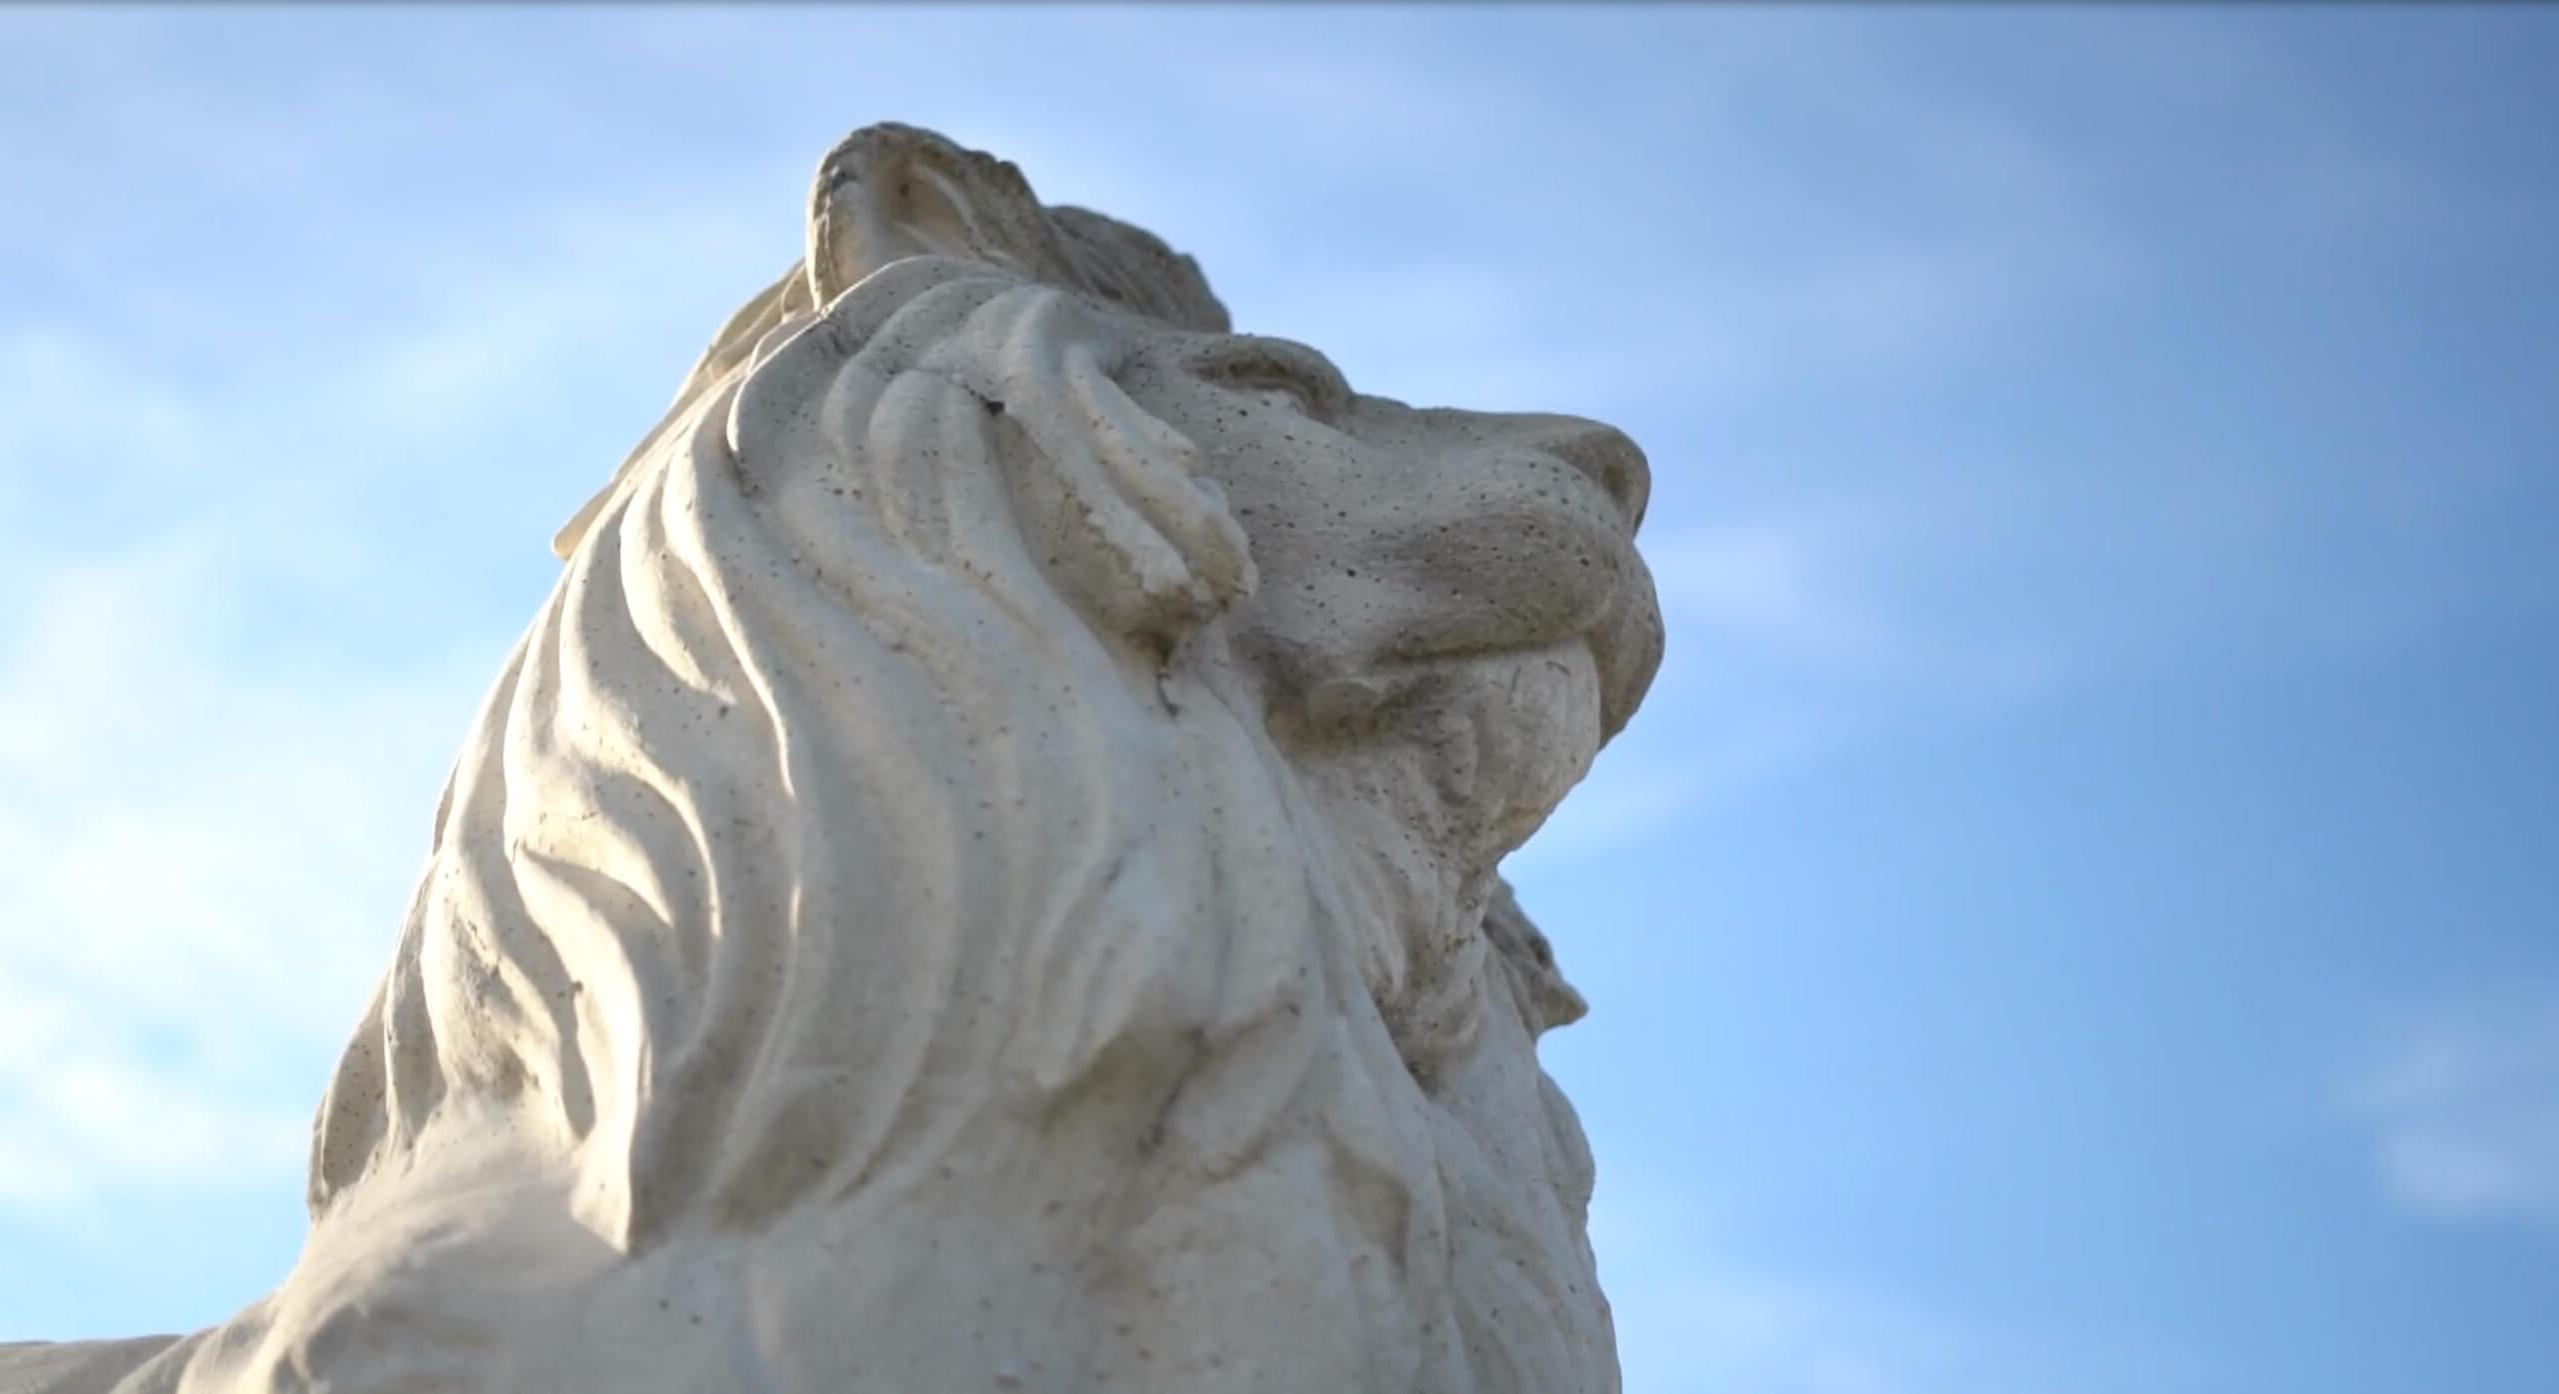 Worm's-eye view of lion statue with blue sky in background